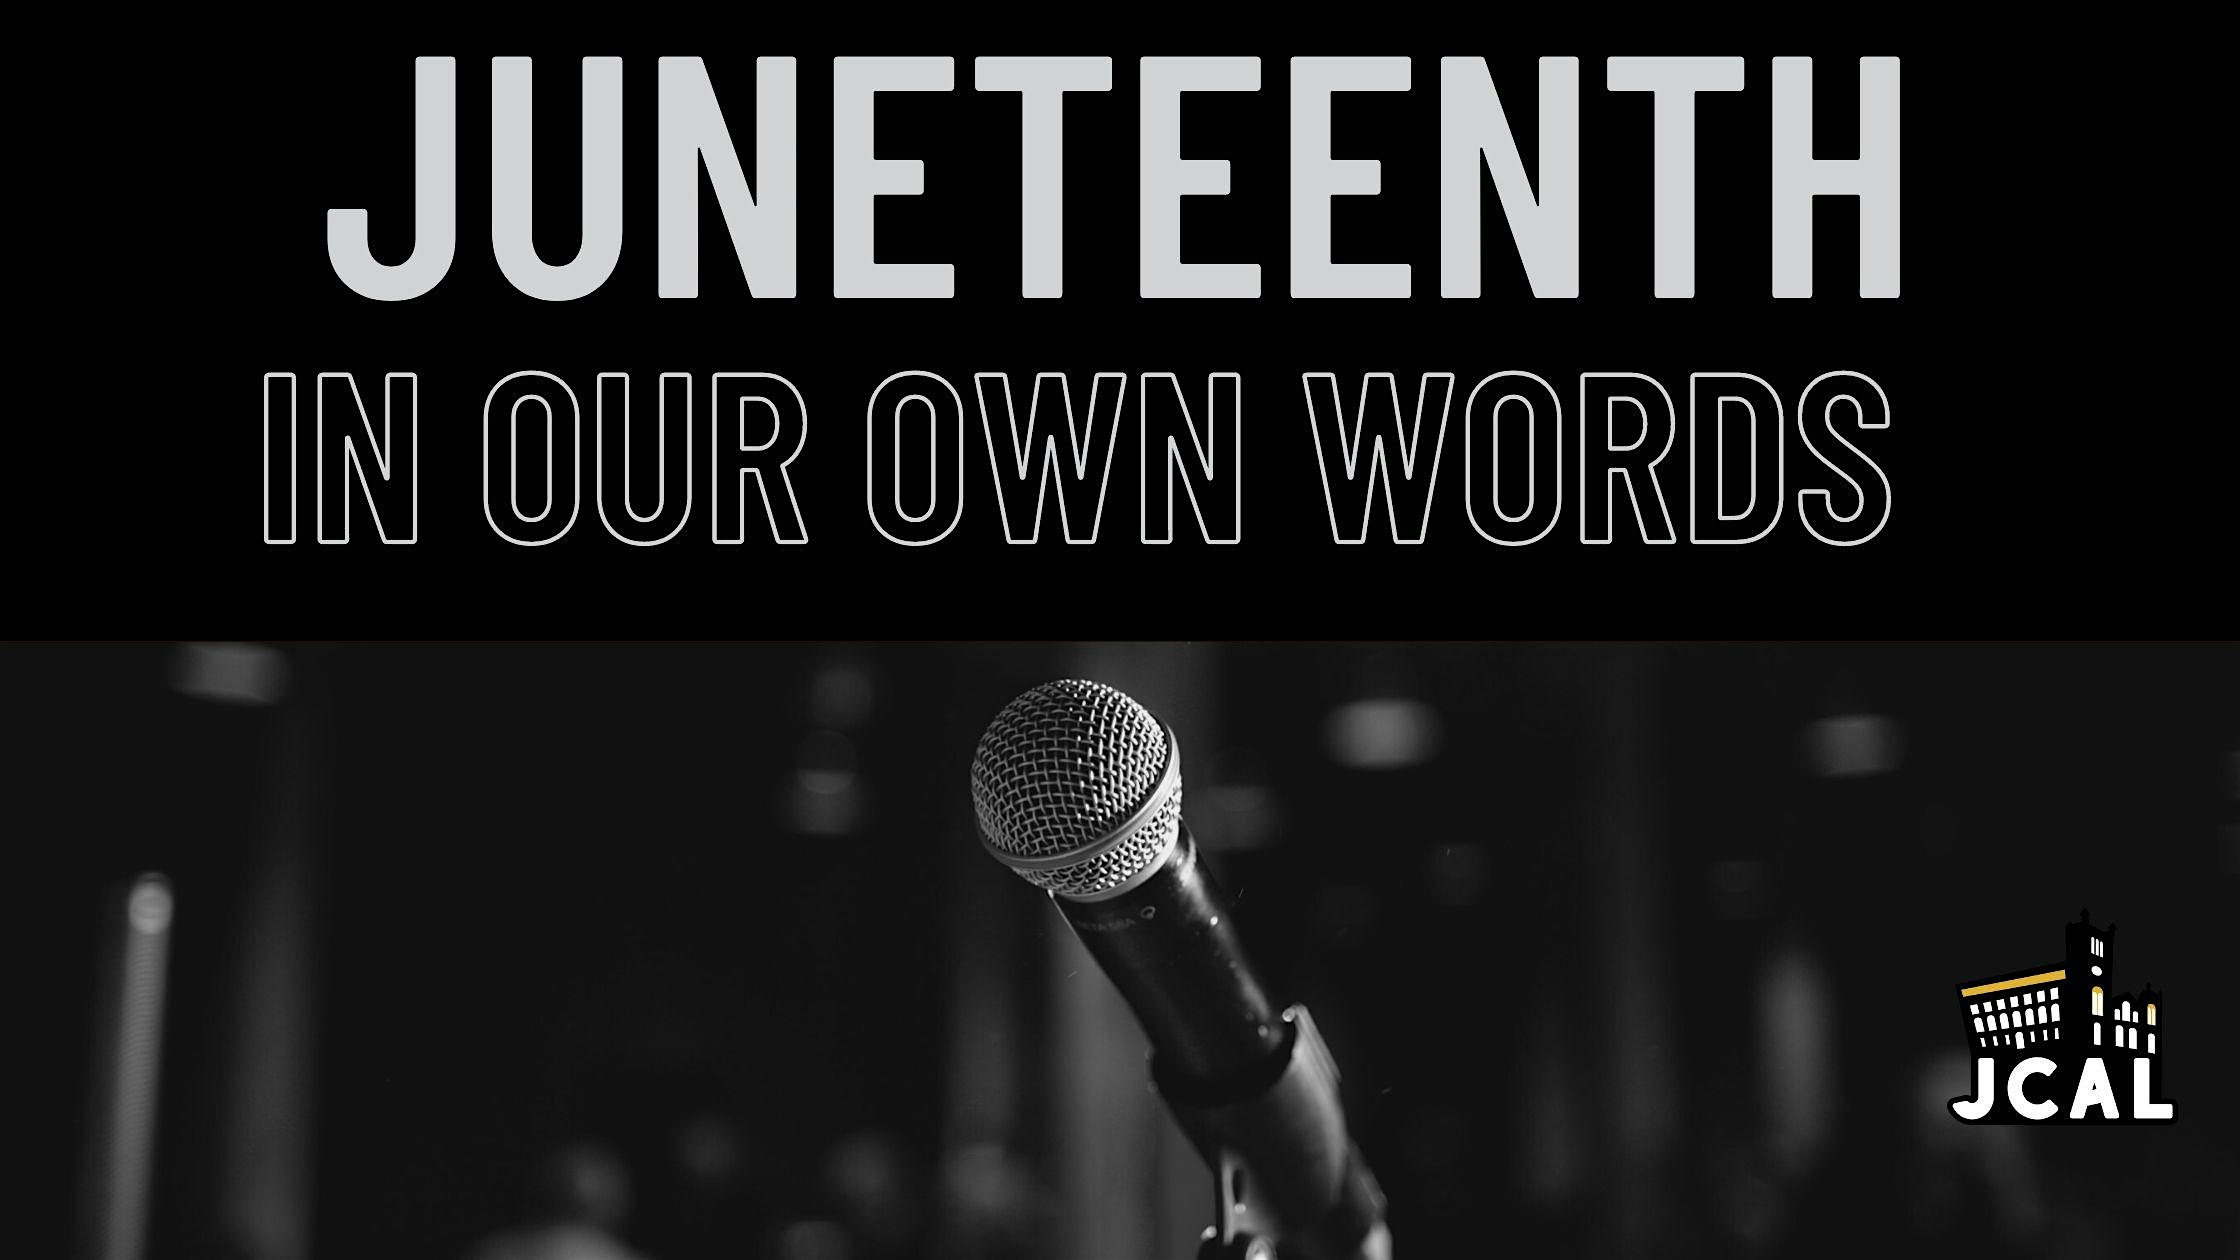 Juneteenth: In Our Words